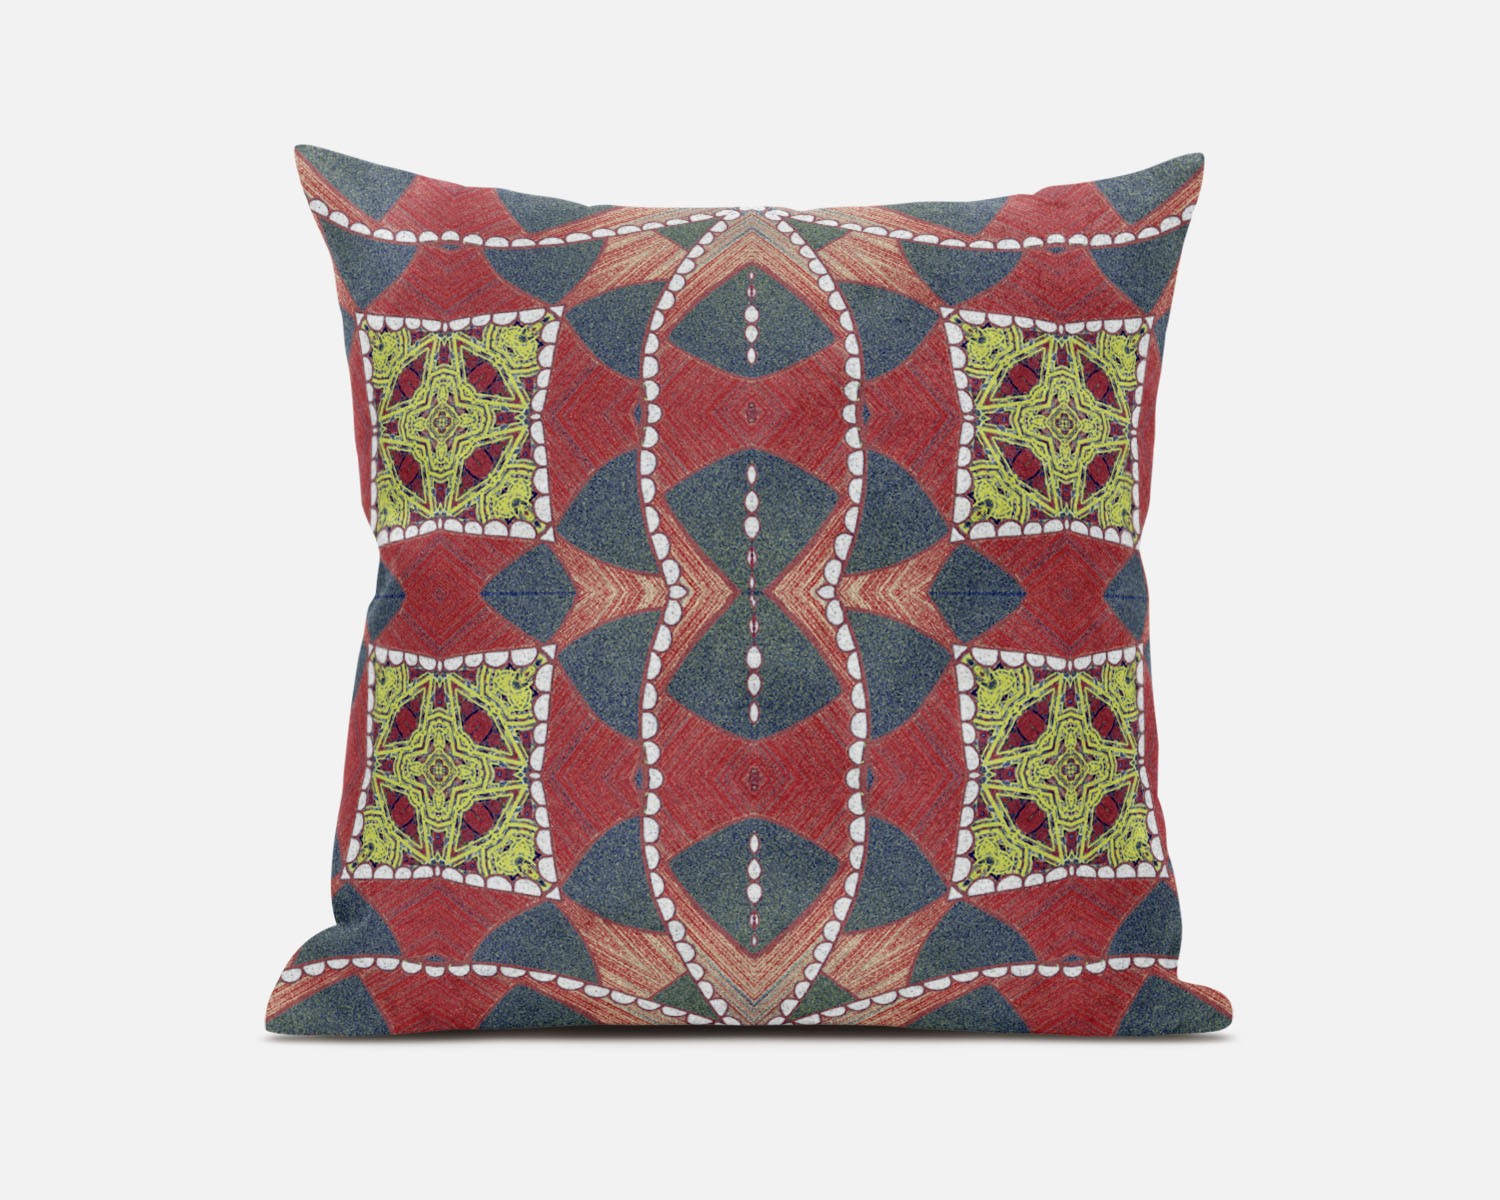 18" Red Gray Cosmic Circle Boho Suede Throw Pillow-411992-1